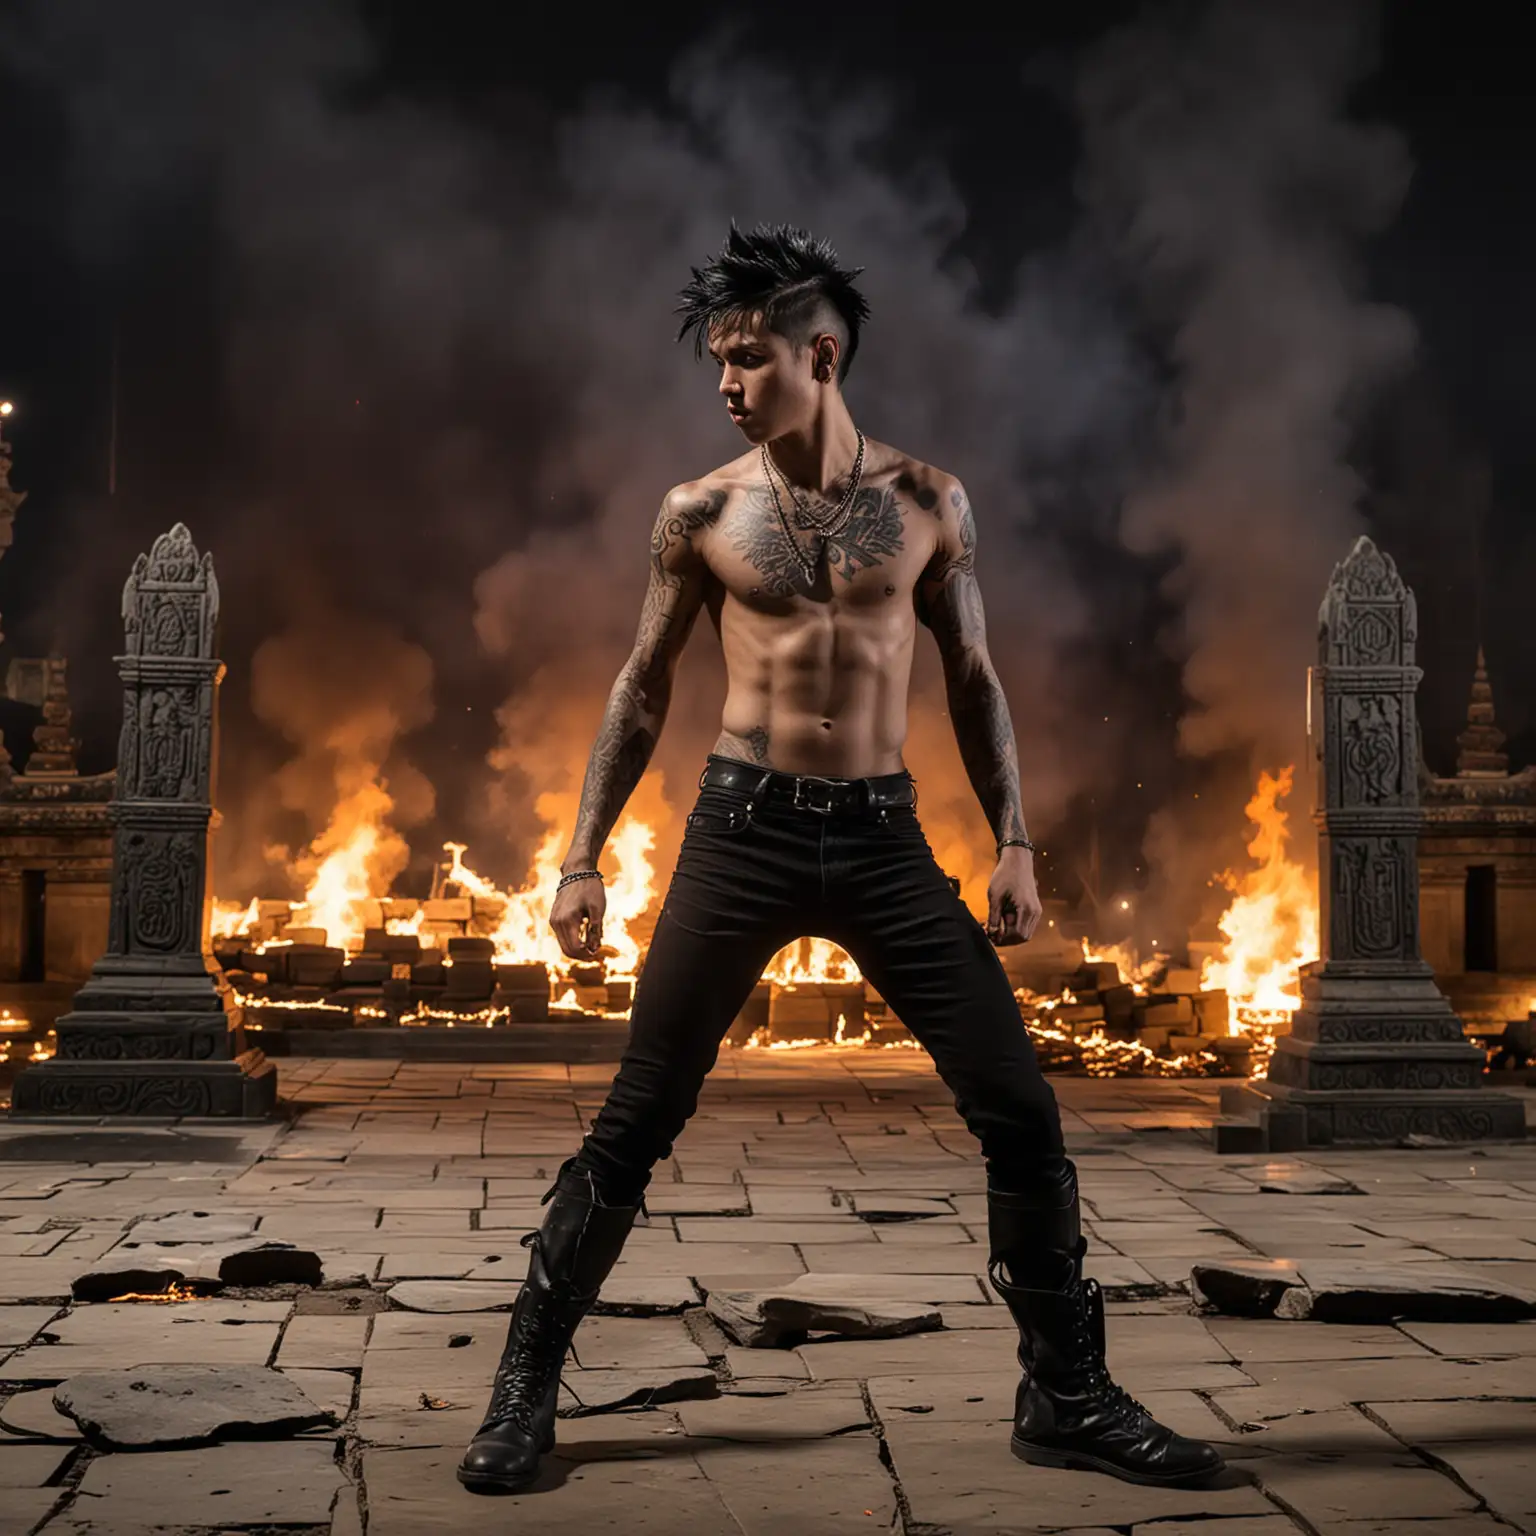 Rebellious-Teen-Battling-Flames-at-Indonesian-Temple-Under-Night-Sky